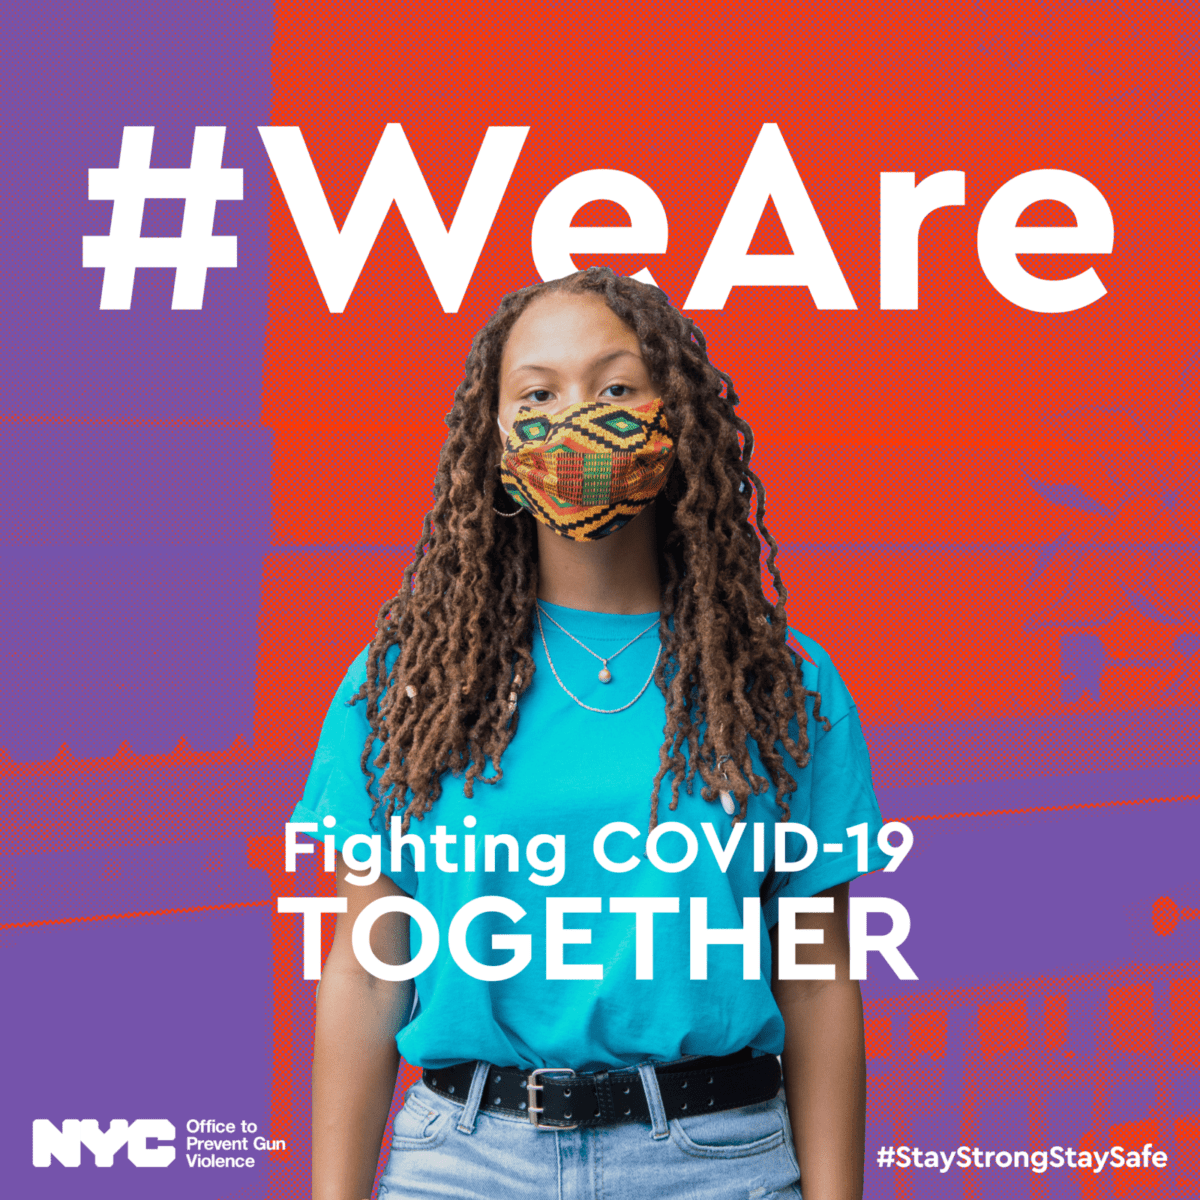 #WeAre Fighting COVID-19 TOGETHER